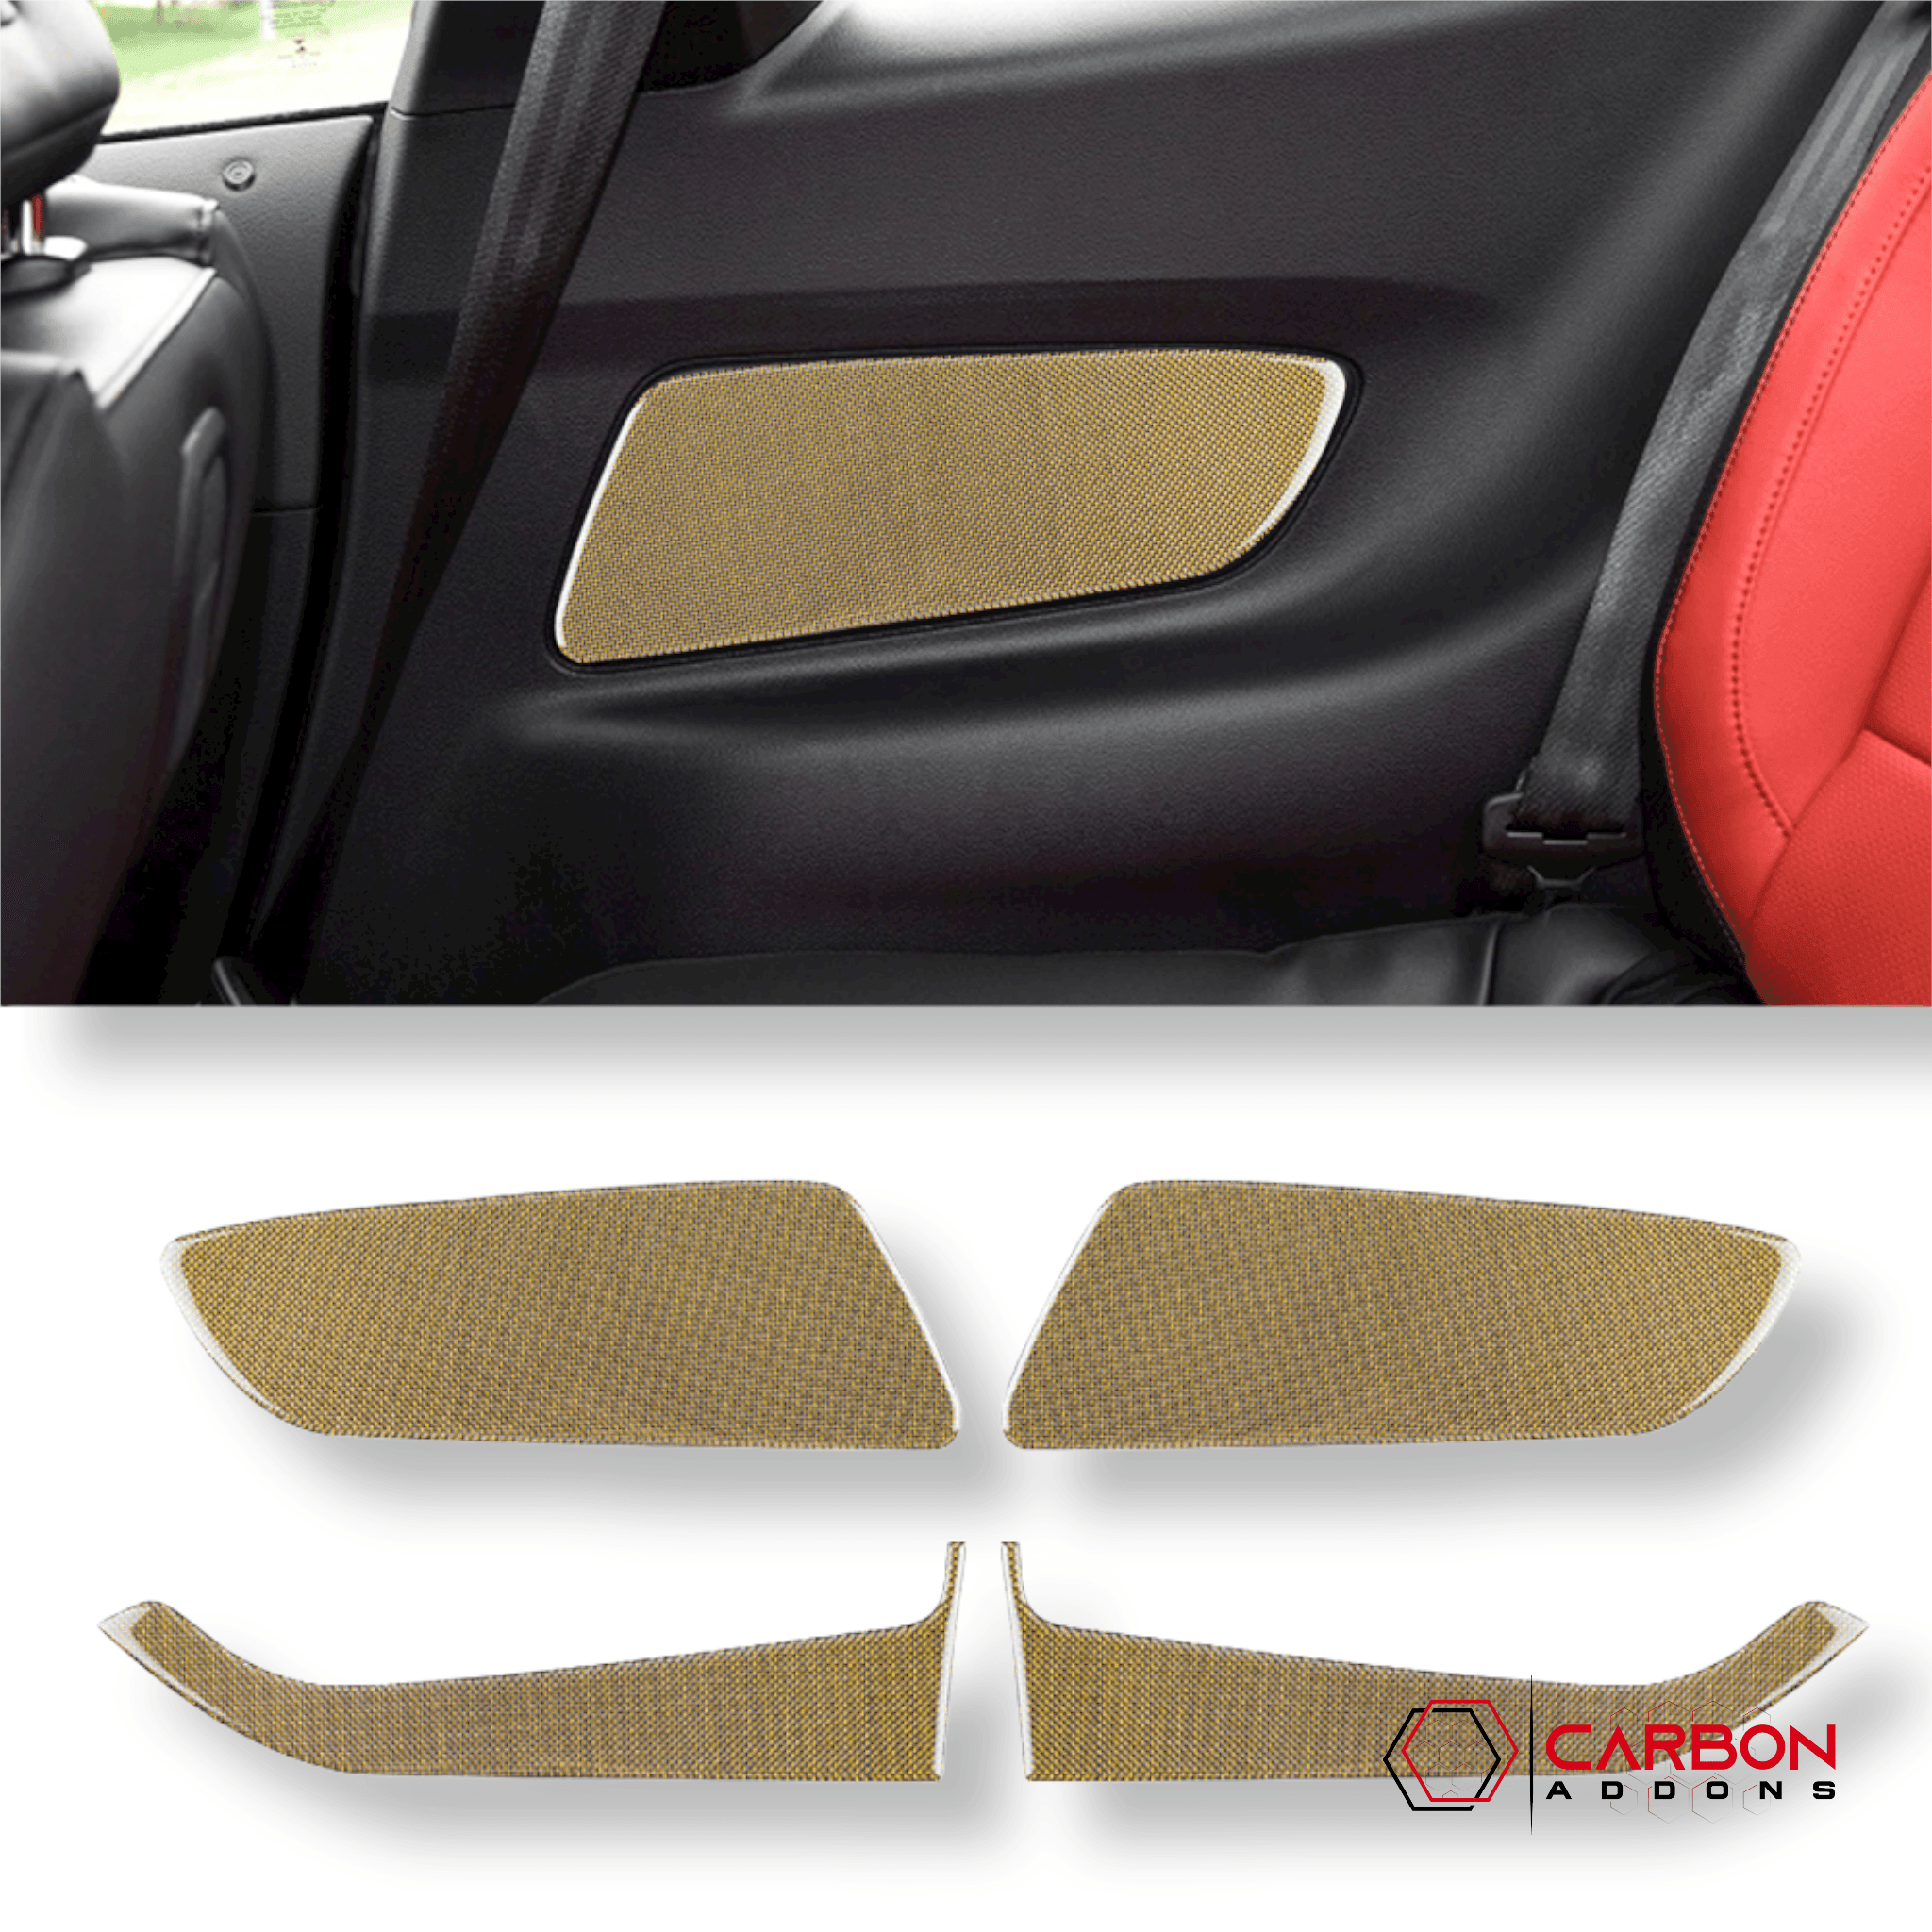 Reflective Carbon Fiber Front/Rear Door Panel Overlay for Ford Mustang 2015-2023 - carbonaddons Carbon Fiber Parts, Accessories, Upgrades, Mods